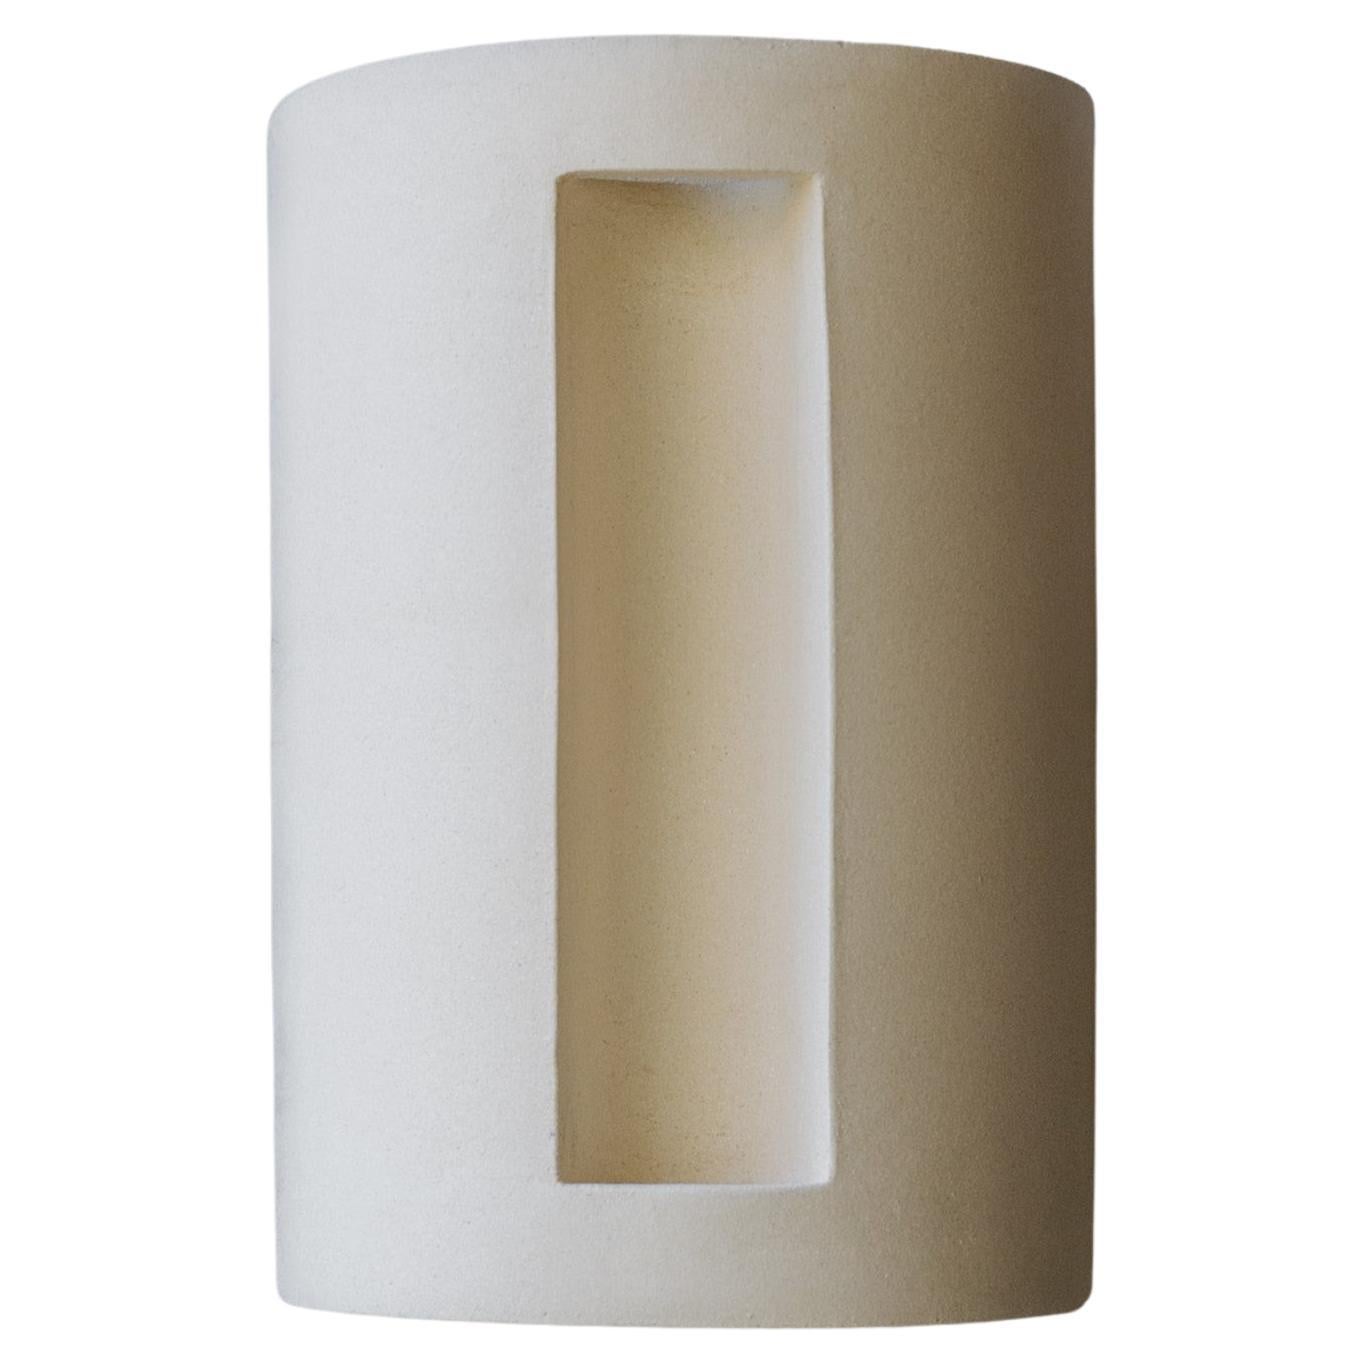 Koilos Wall Light by Lisa Allegra For Sale